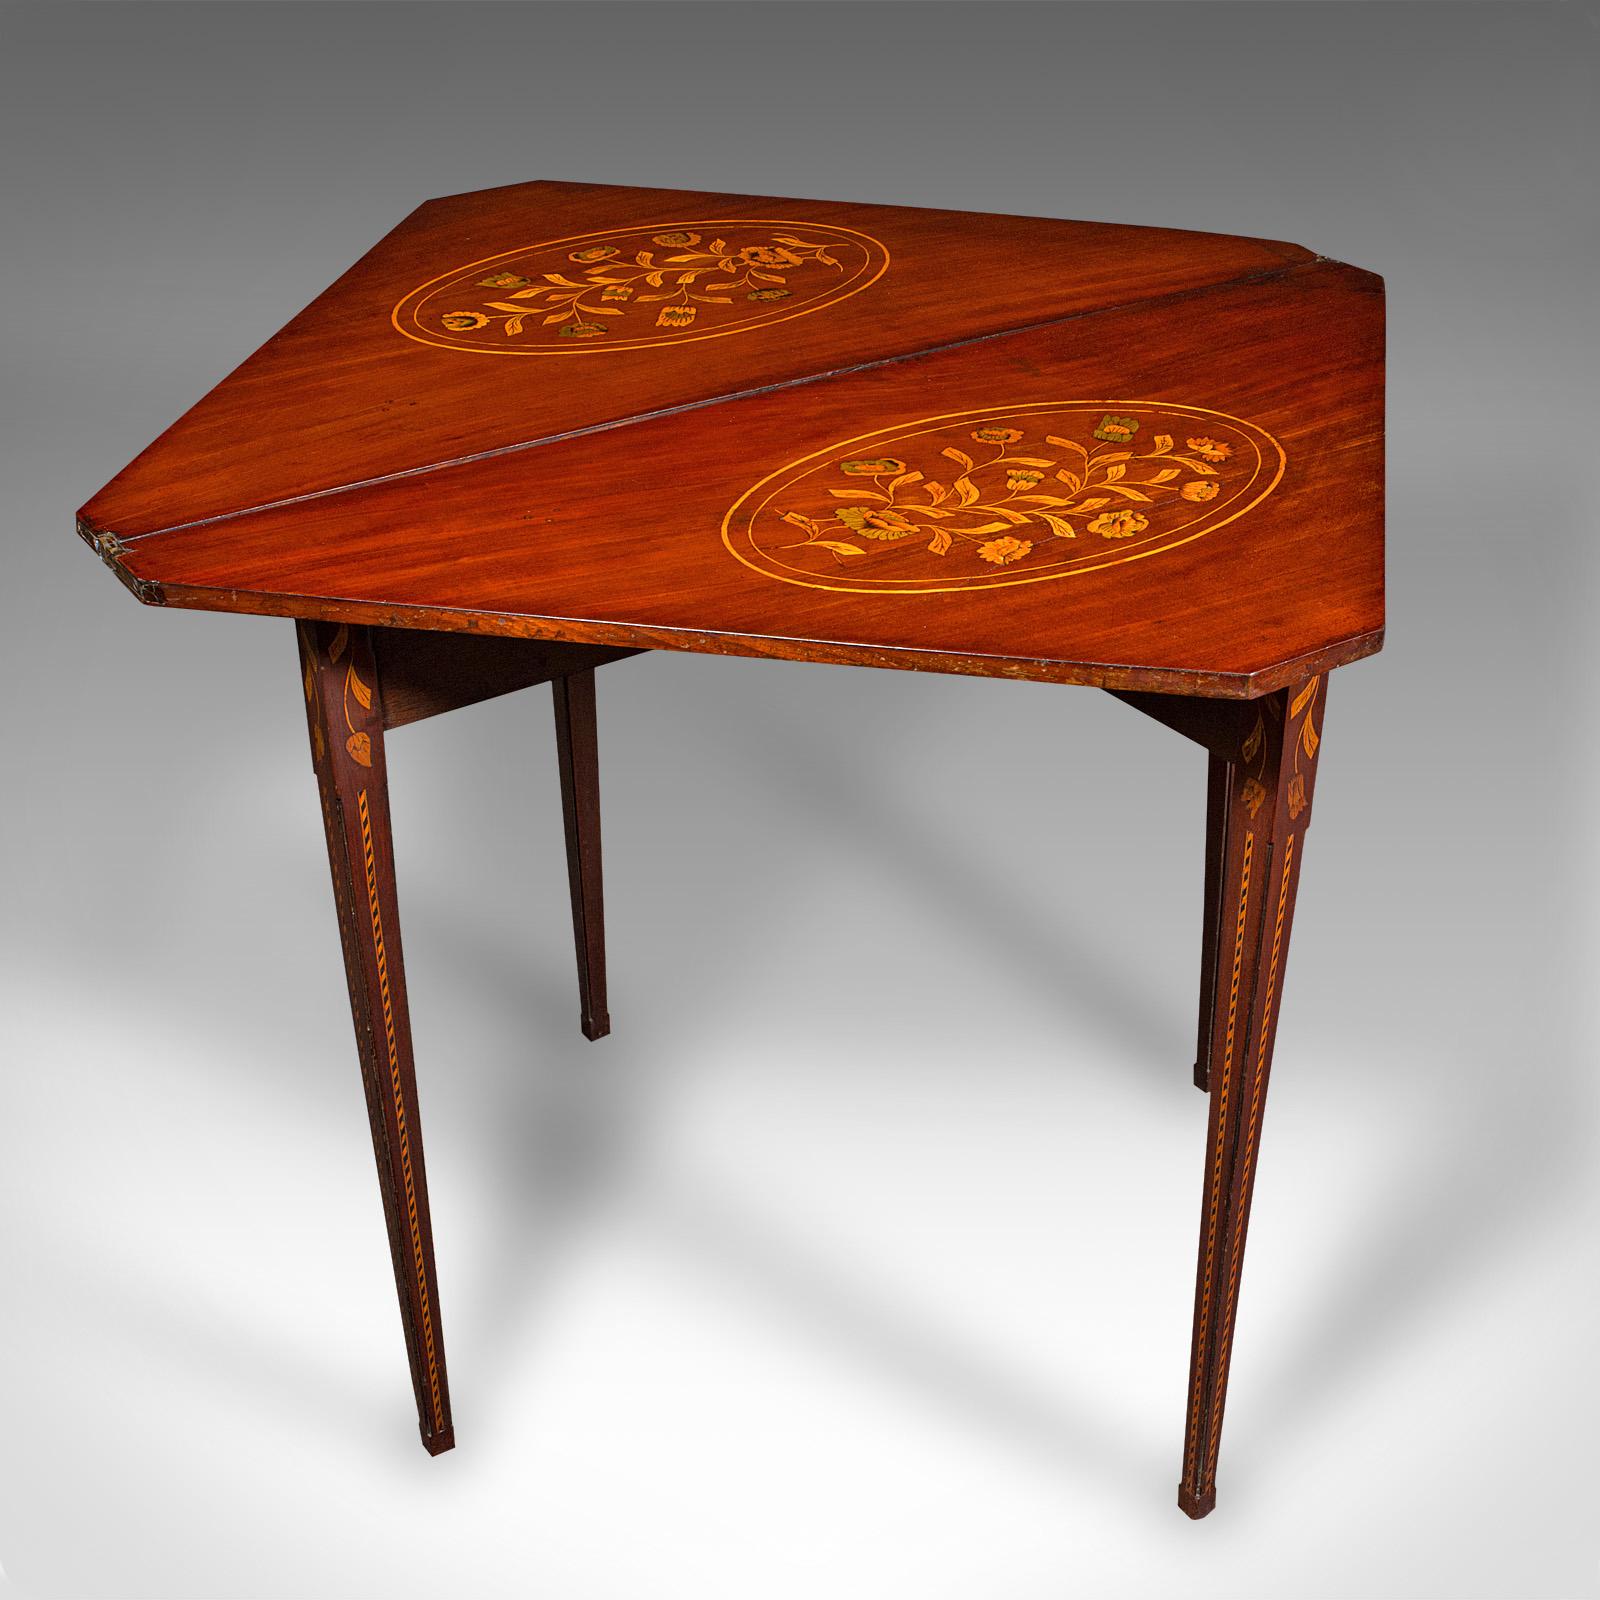 This is an antique flower display table. A Dutch, mahogany and inlaid fold-over gate leg console table, dating to the Georgian period, circa 1780.

Captivating craftsmanship with exceptional colour and detail
Displays a desirable aged patina and in